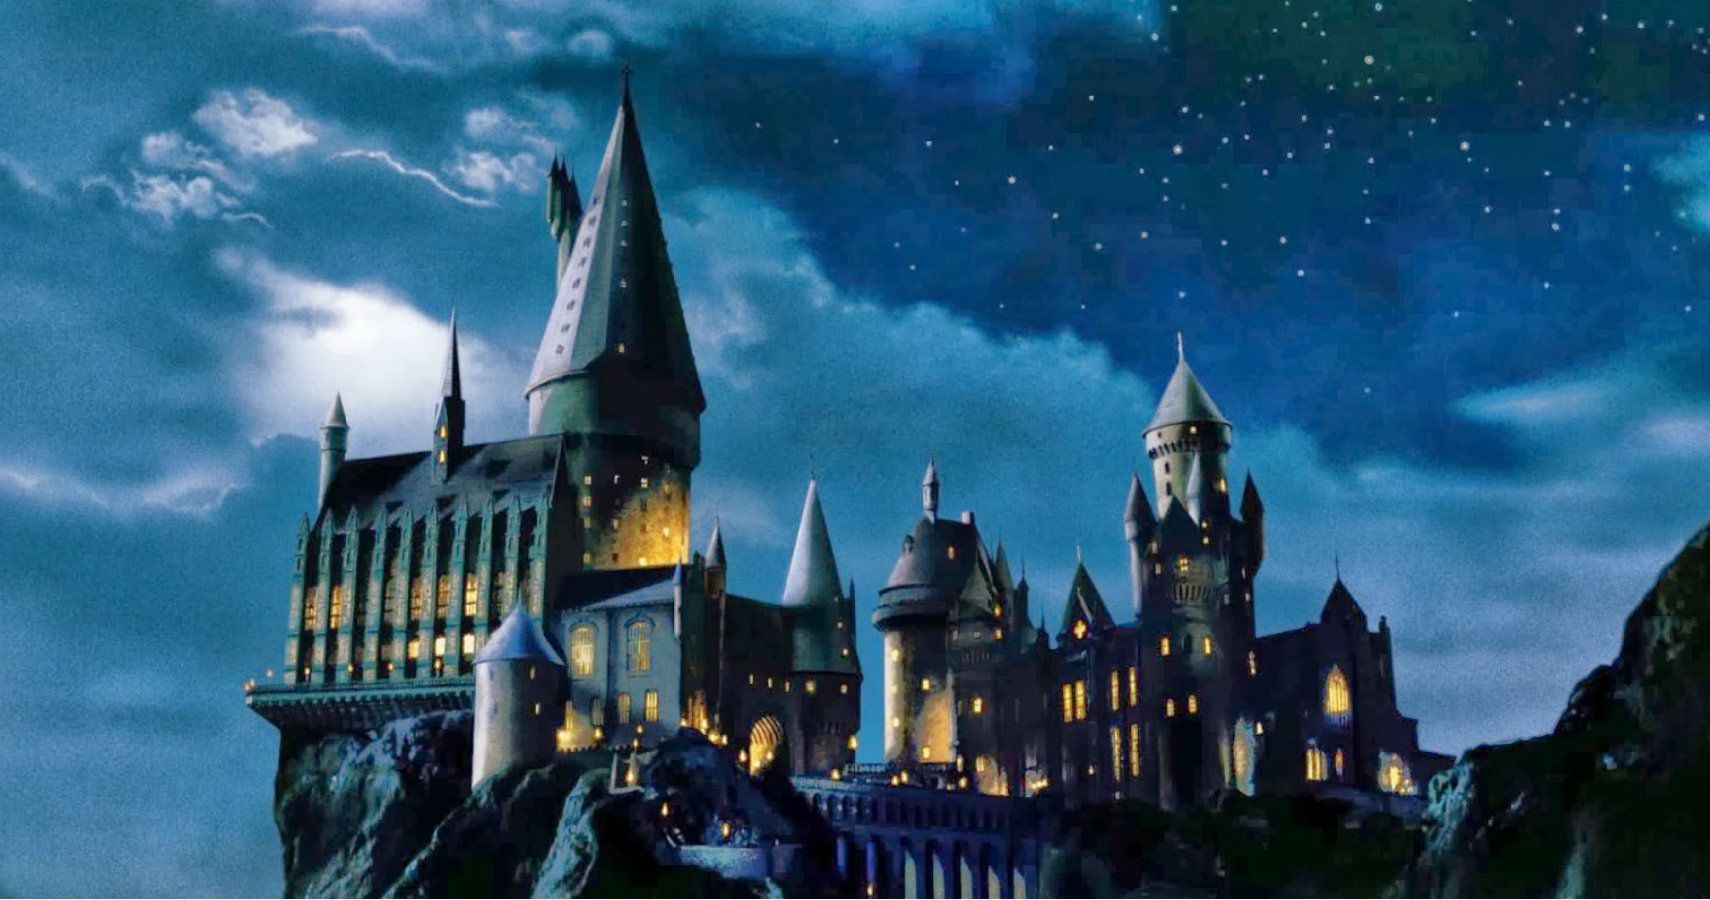 Harry Potter 10 Things About Hogwarts The Movies Leave Out RELATED Harry Potter 20 Strangest Details About Remus Lupin’s Anatomy